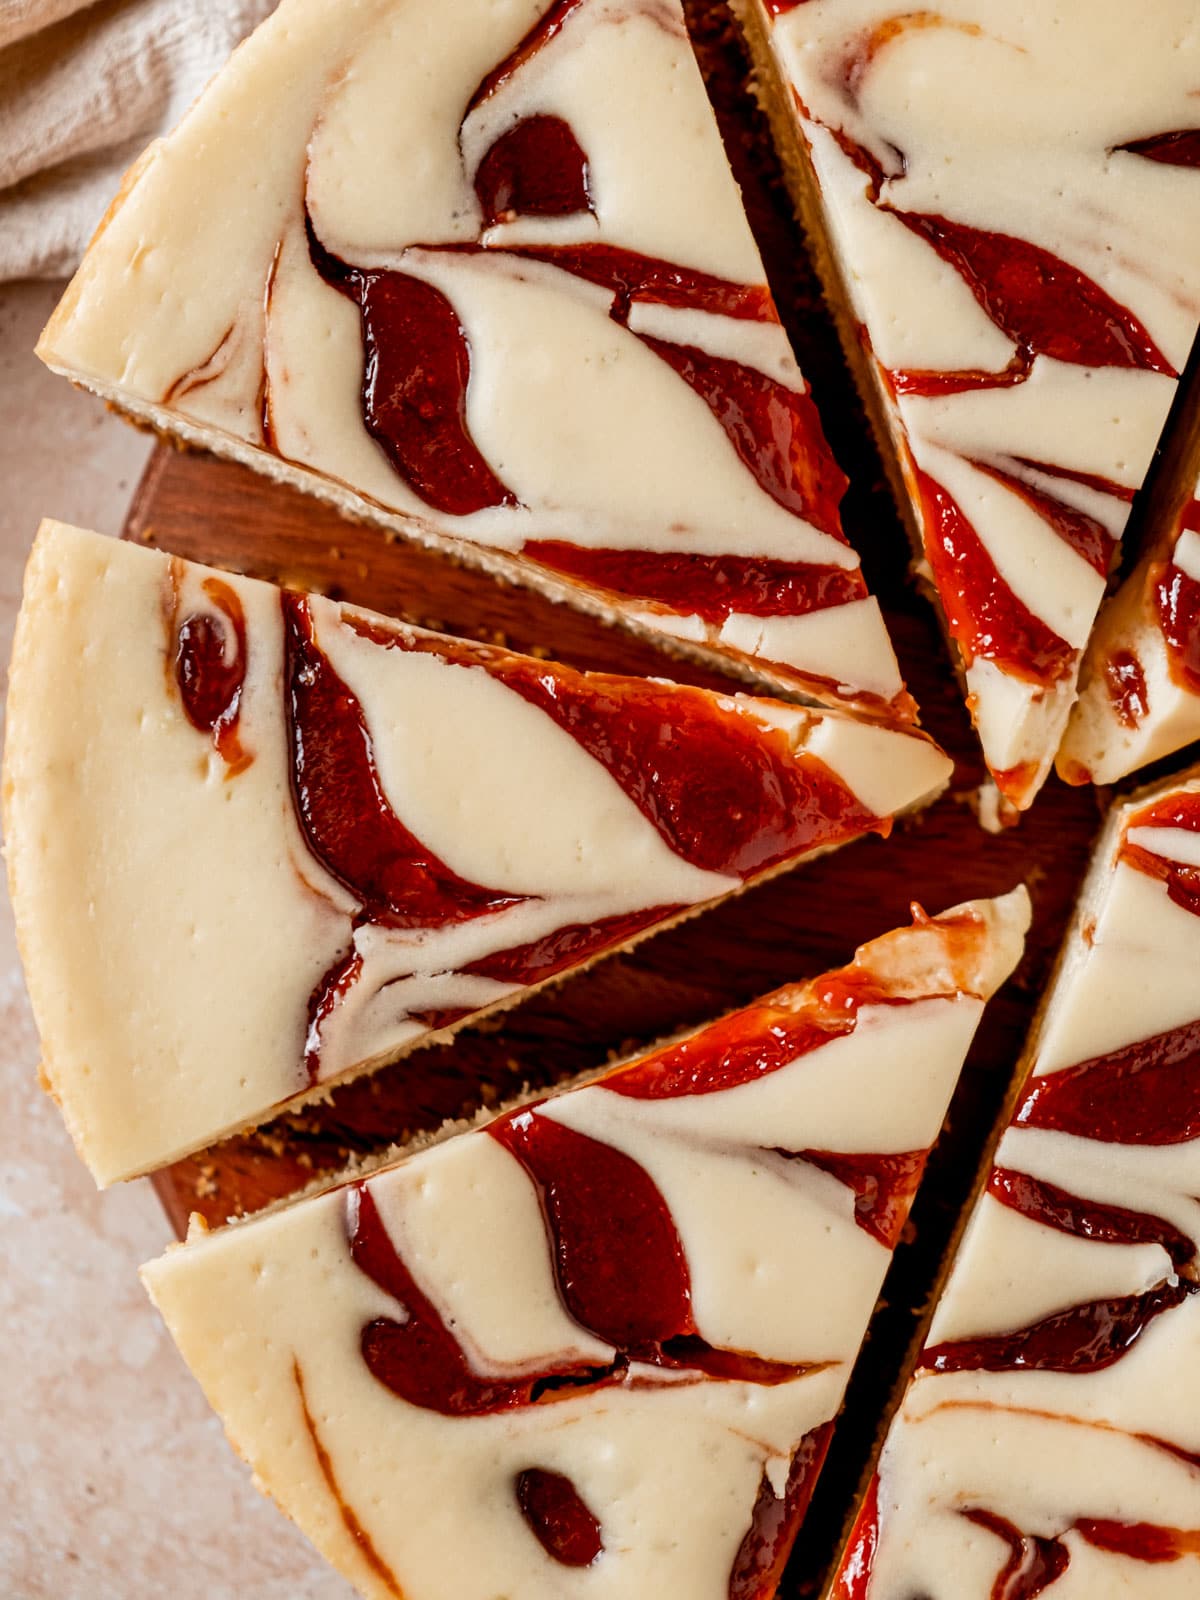 Overhead view of baked cheesecake slices with guava swirl.